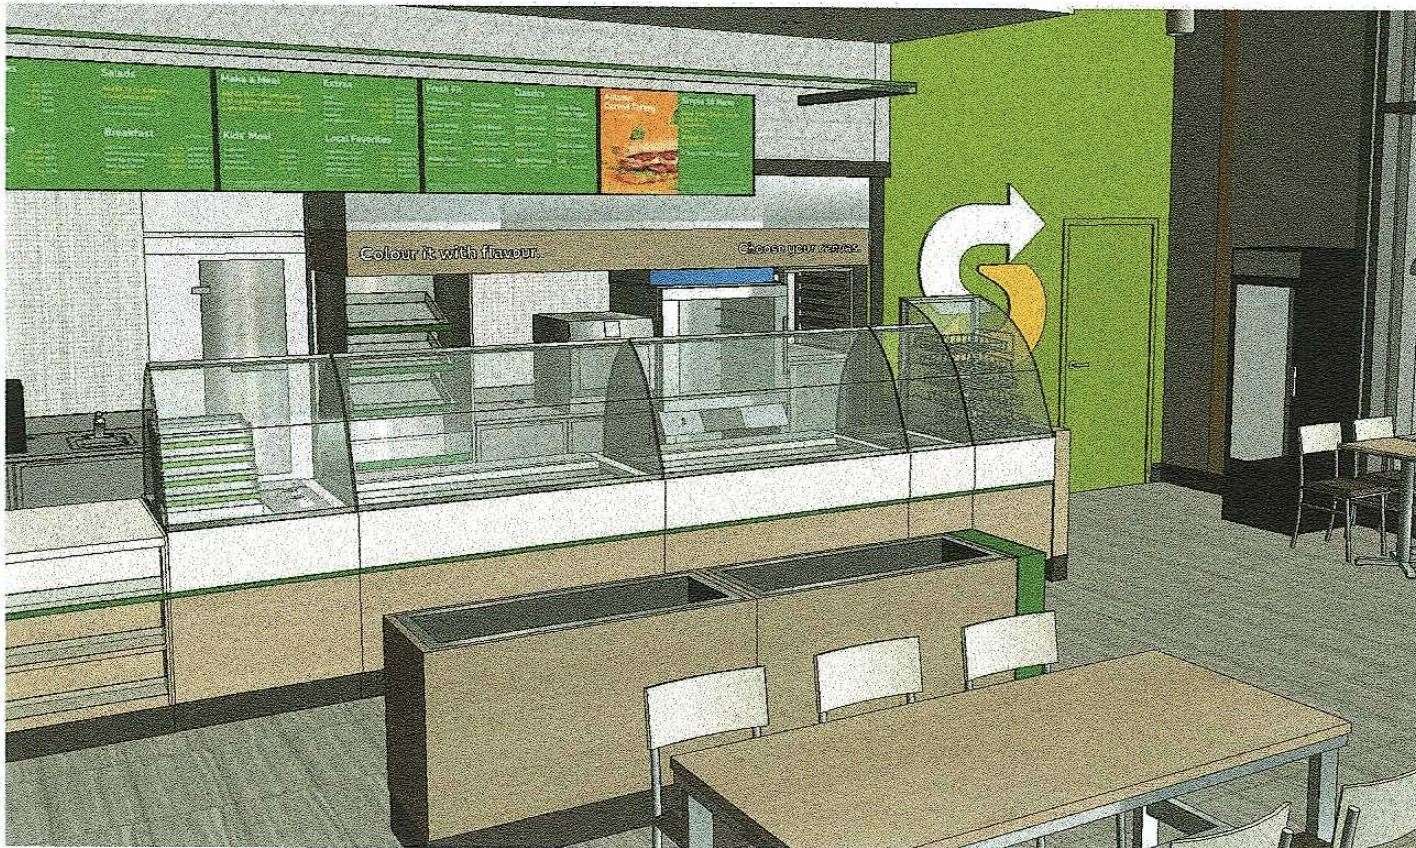 Plans have been submitted to open a new Subway in Margate